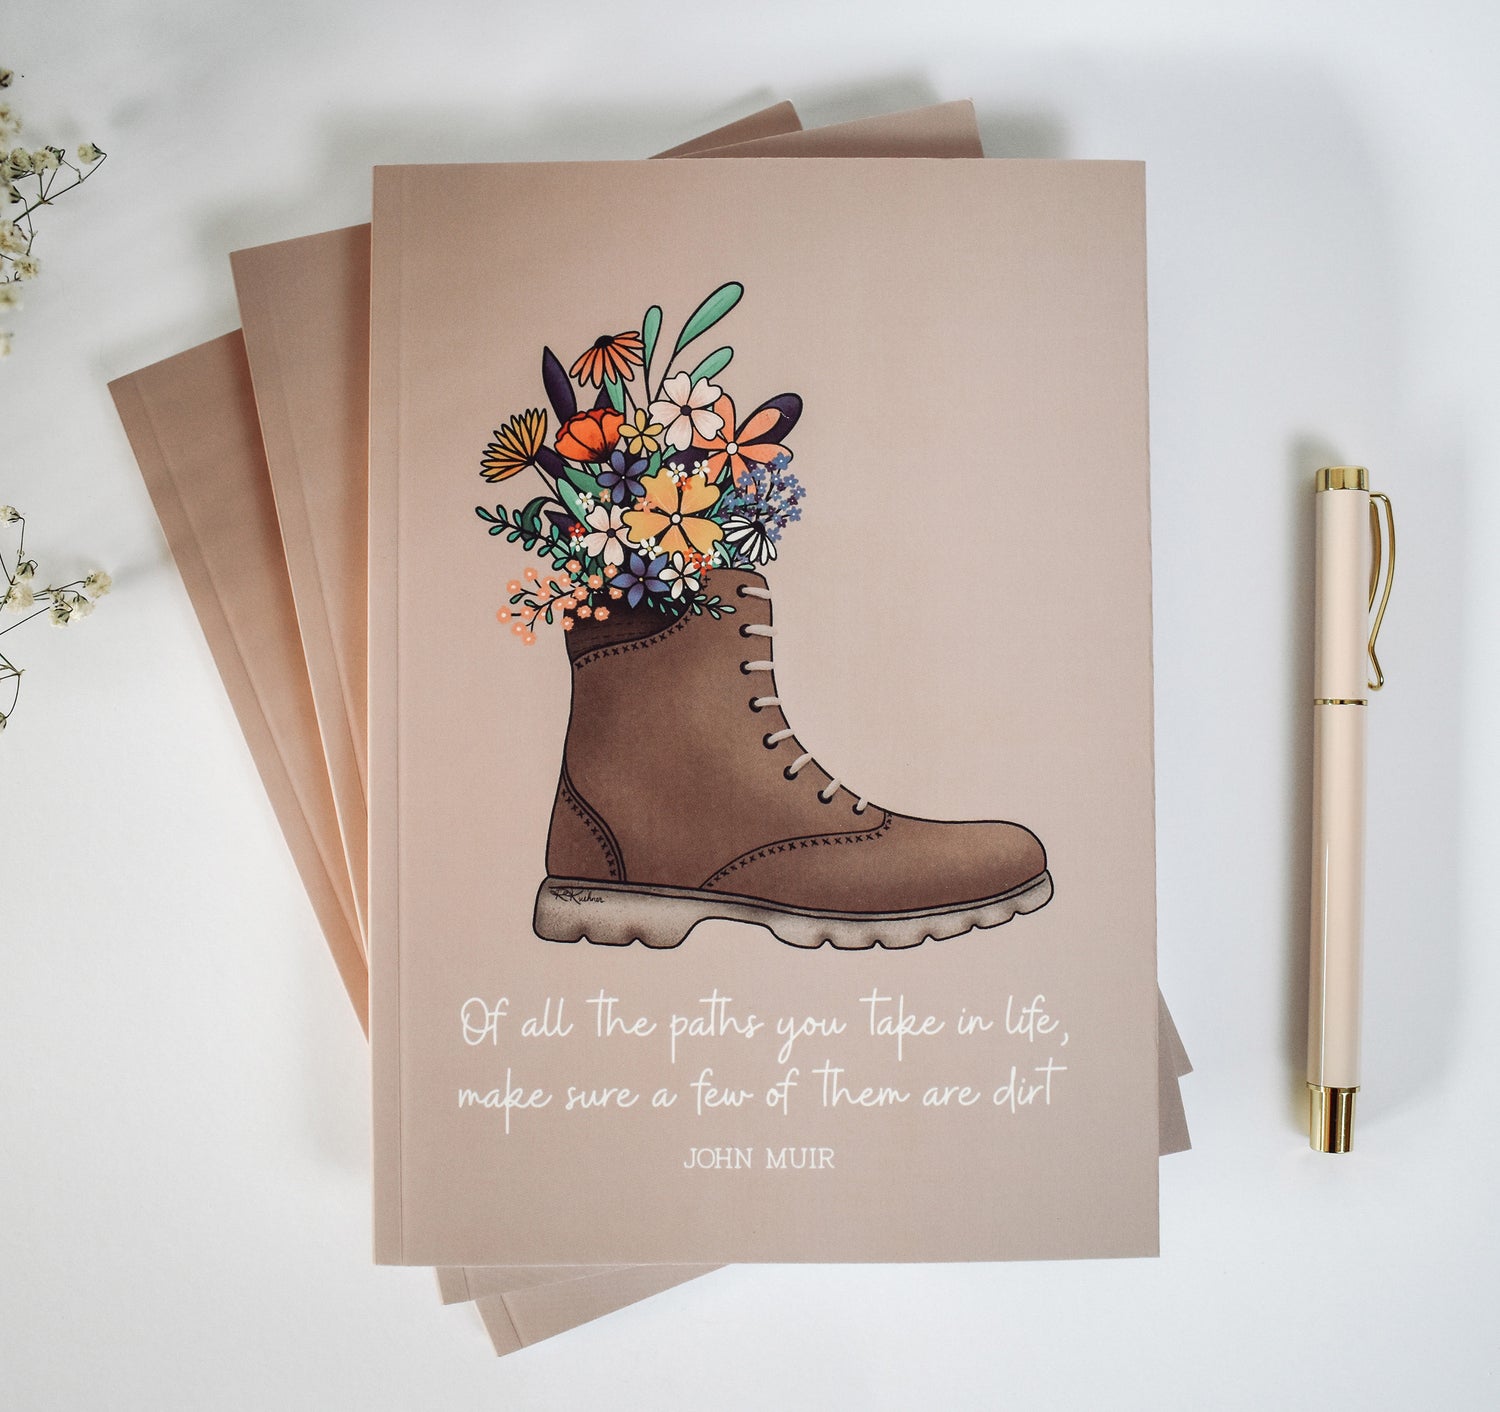 John Muir quote notebook with a hiking boot full of flowers